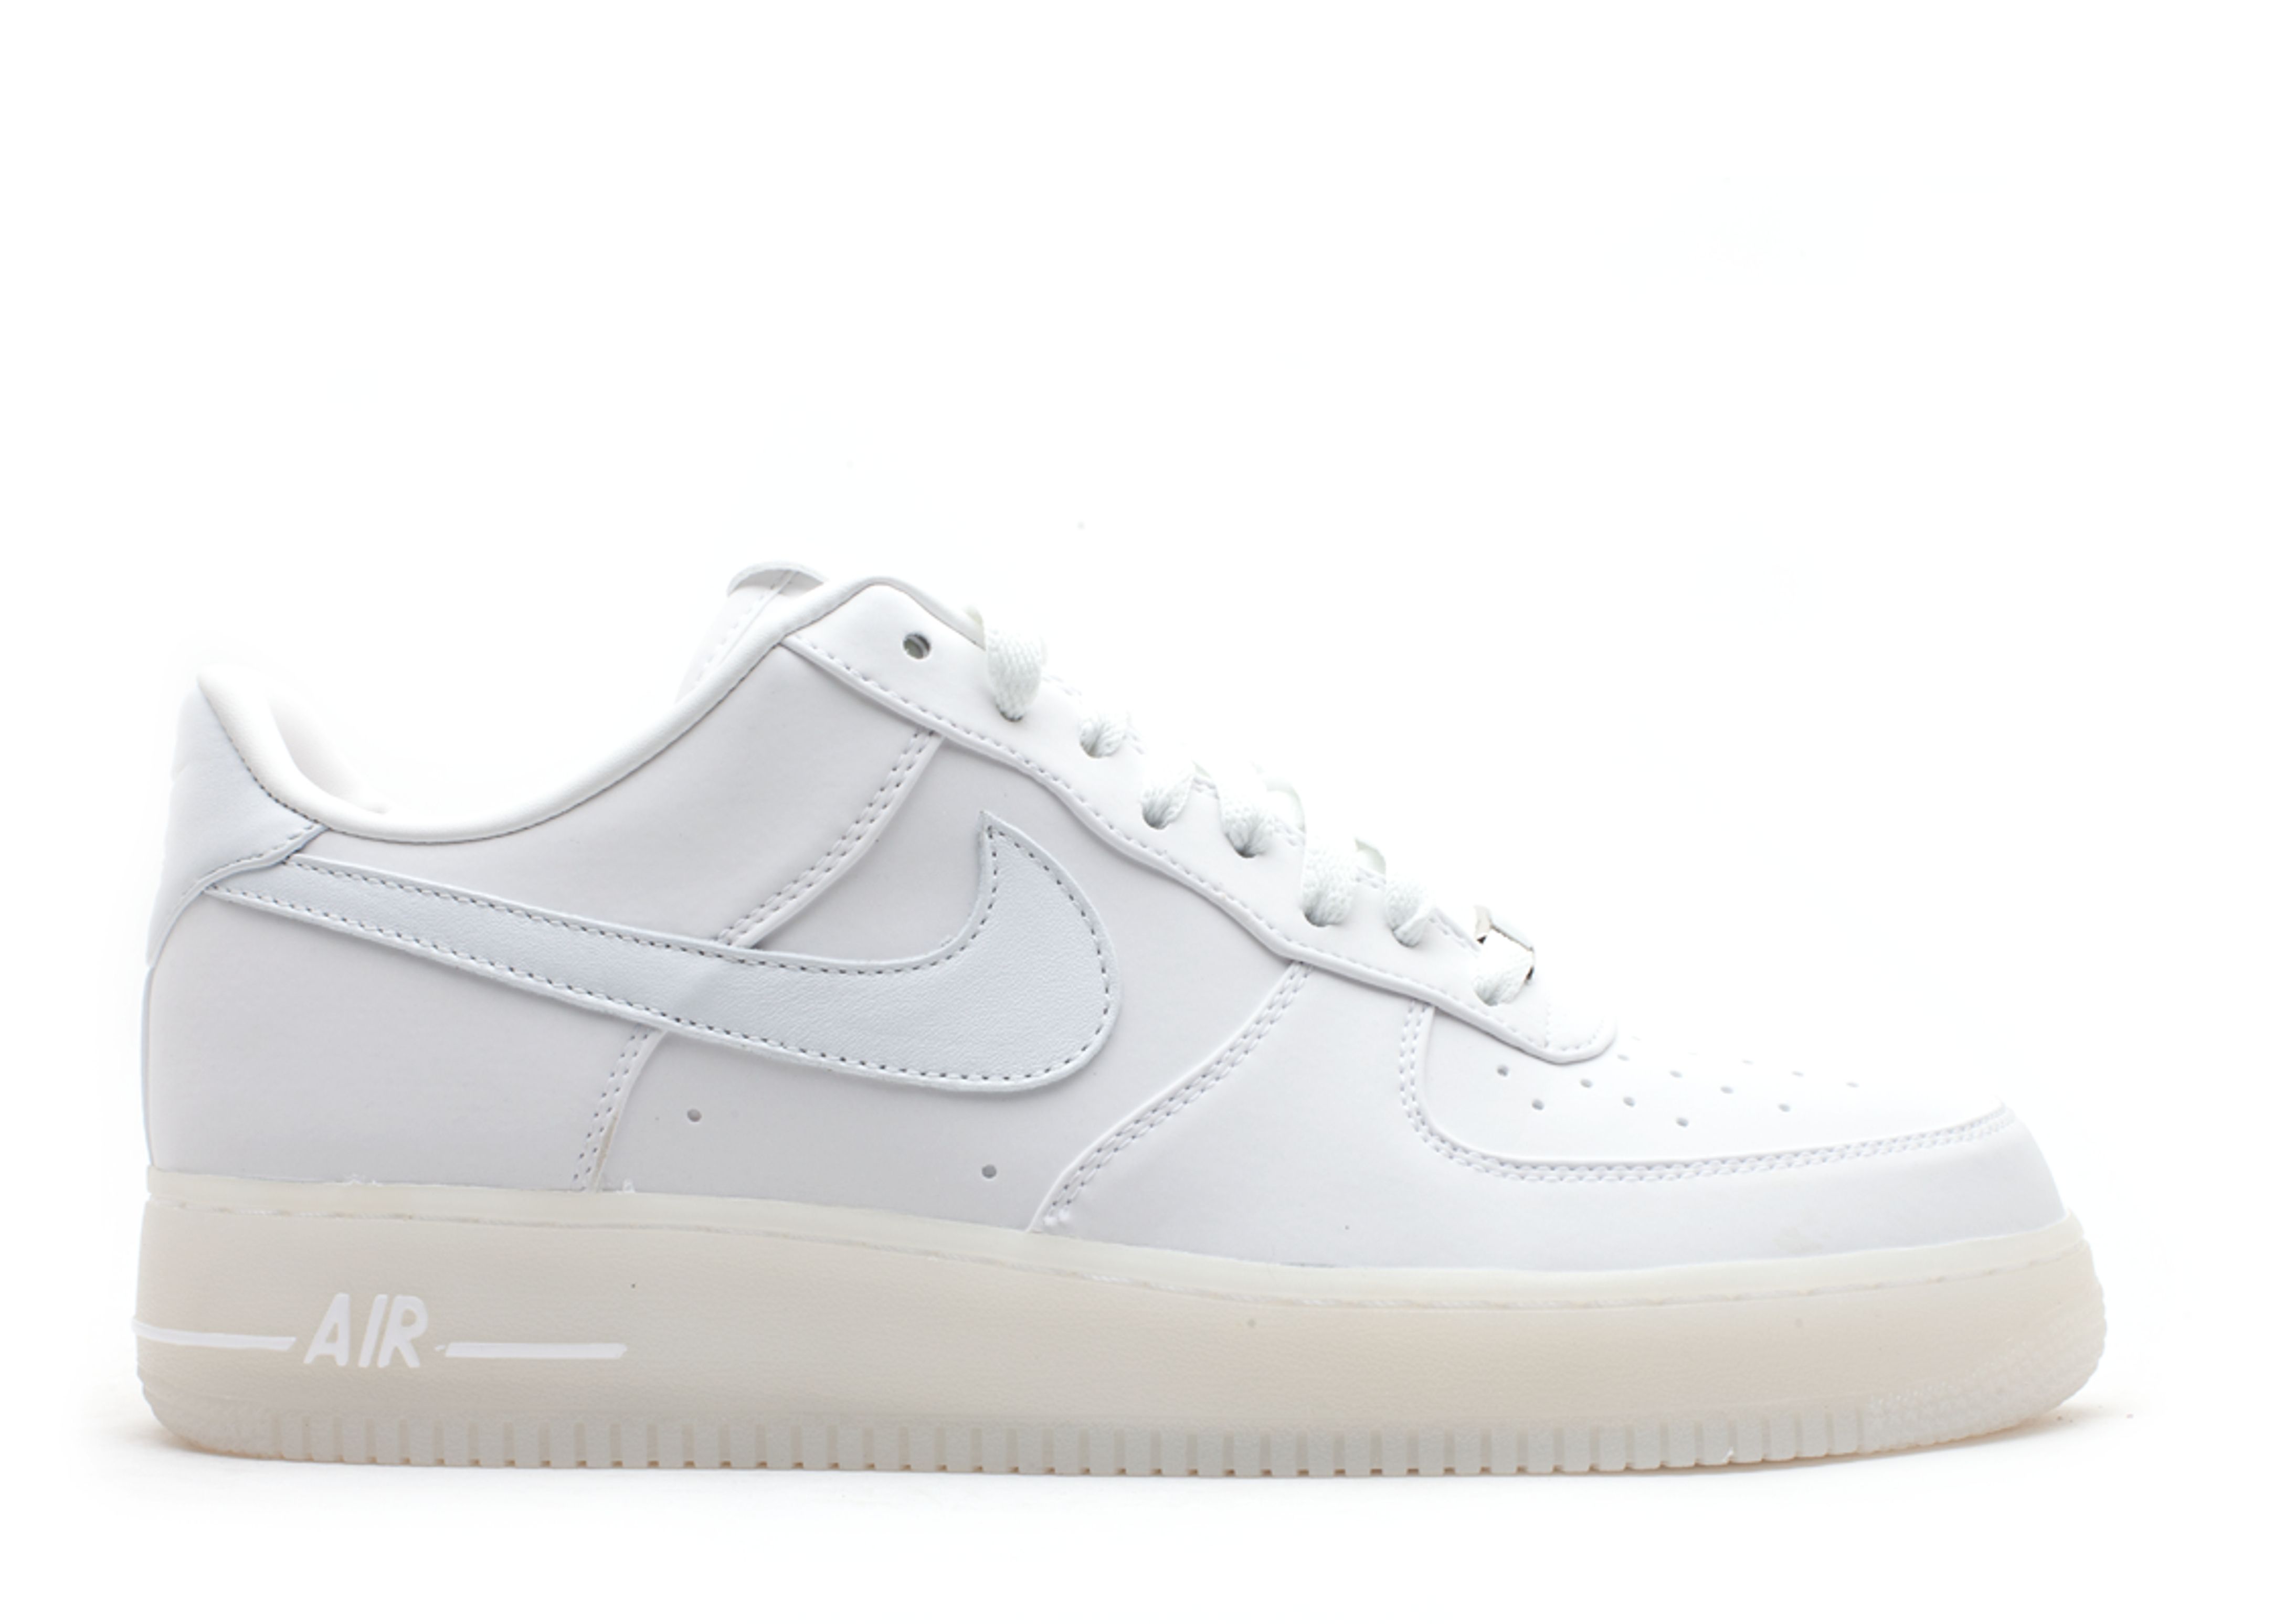 Air Force 1 Low Prm '08 QS 'Pearl Collection' - Nike - 520505 110 -  white/white | Flight Club